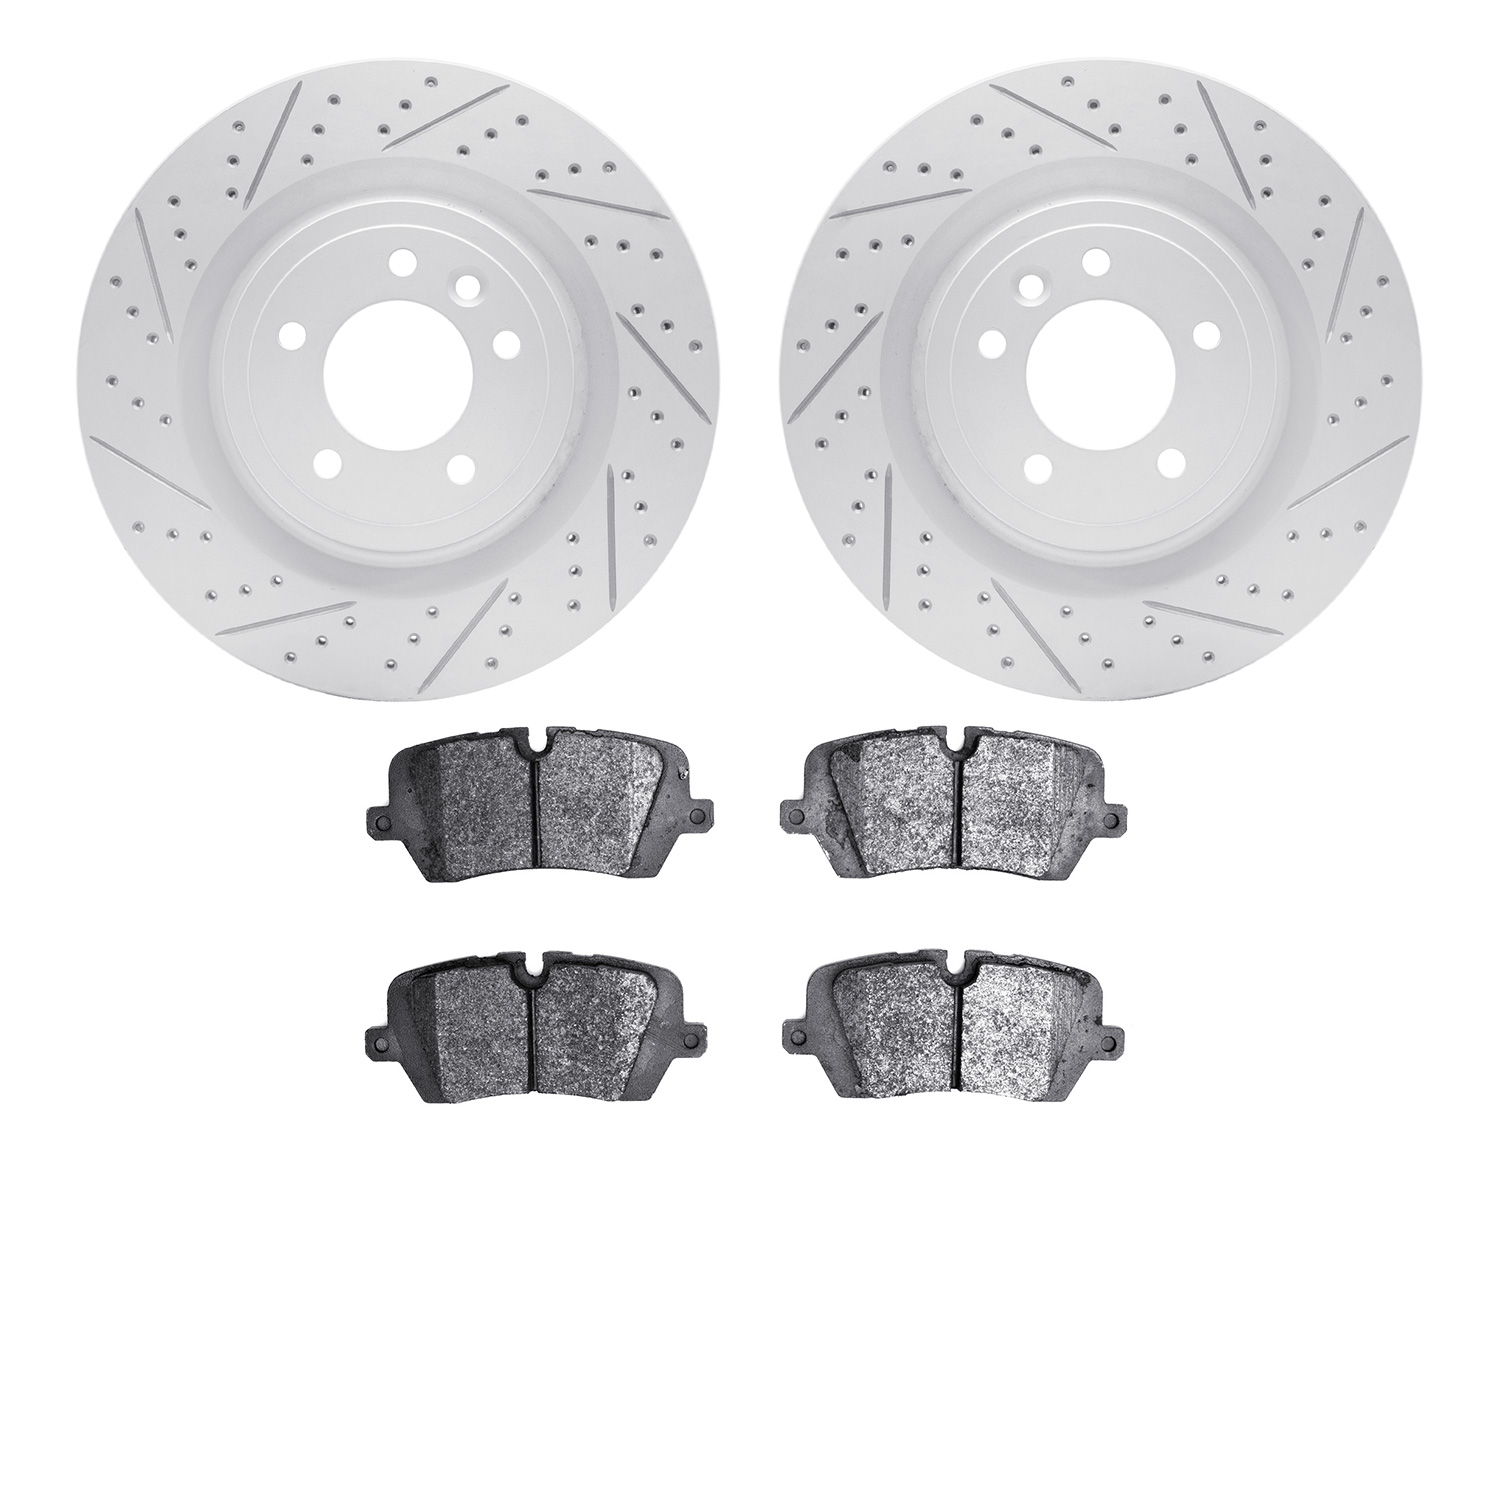 2502-11034 Geoperformance Drilled/Slotted Rotors w/5000 Advanced Brake Pads Kit, 2014-2017 Land Rover, Position: Rear